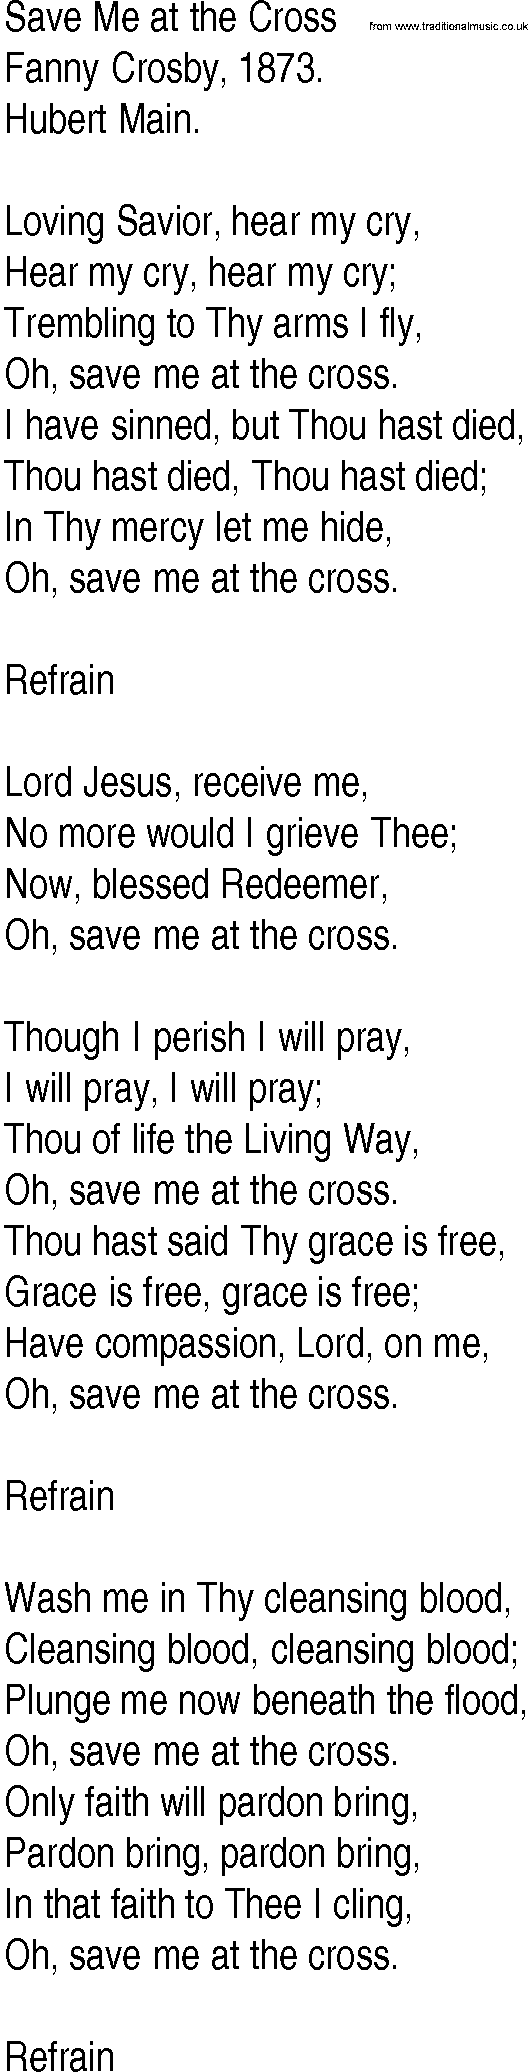 Hymn and Gospel Song: Save Me at the Cross by Fanny Crosby lyrics